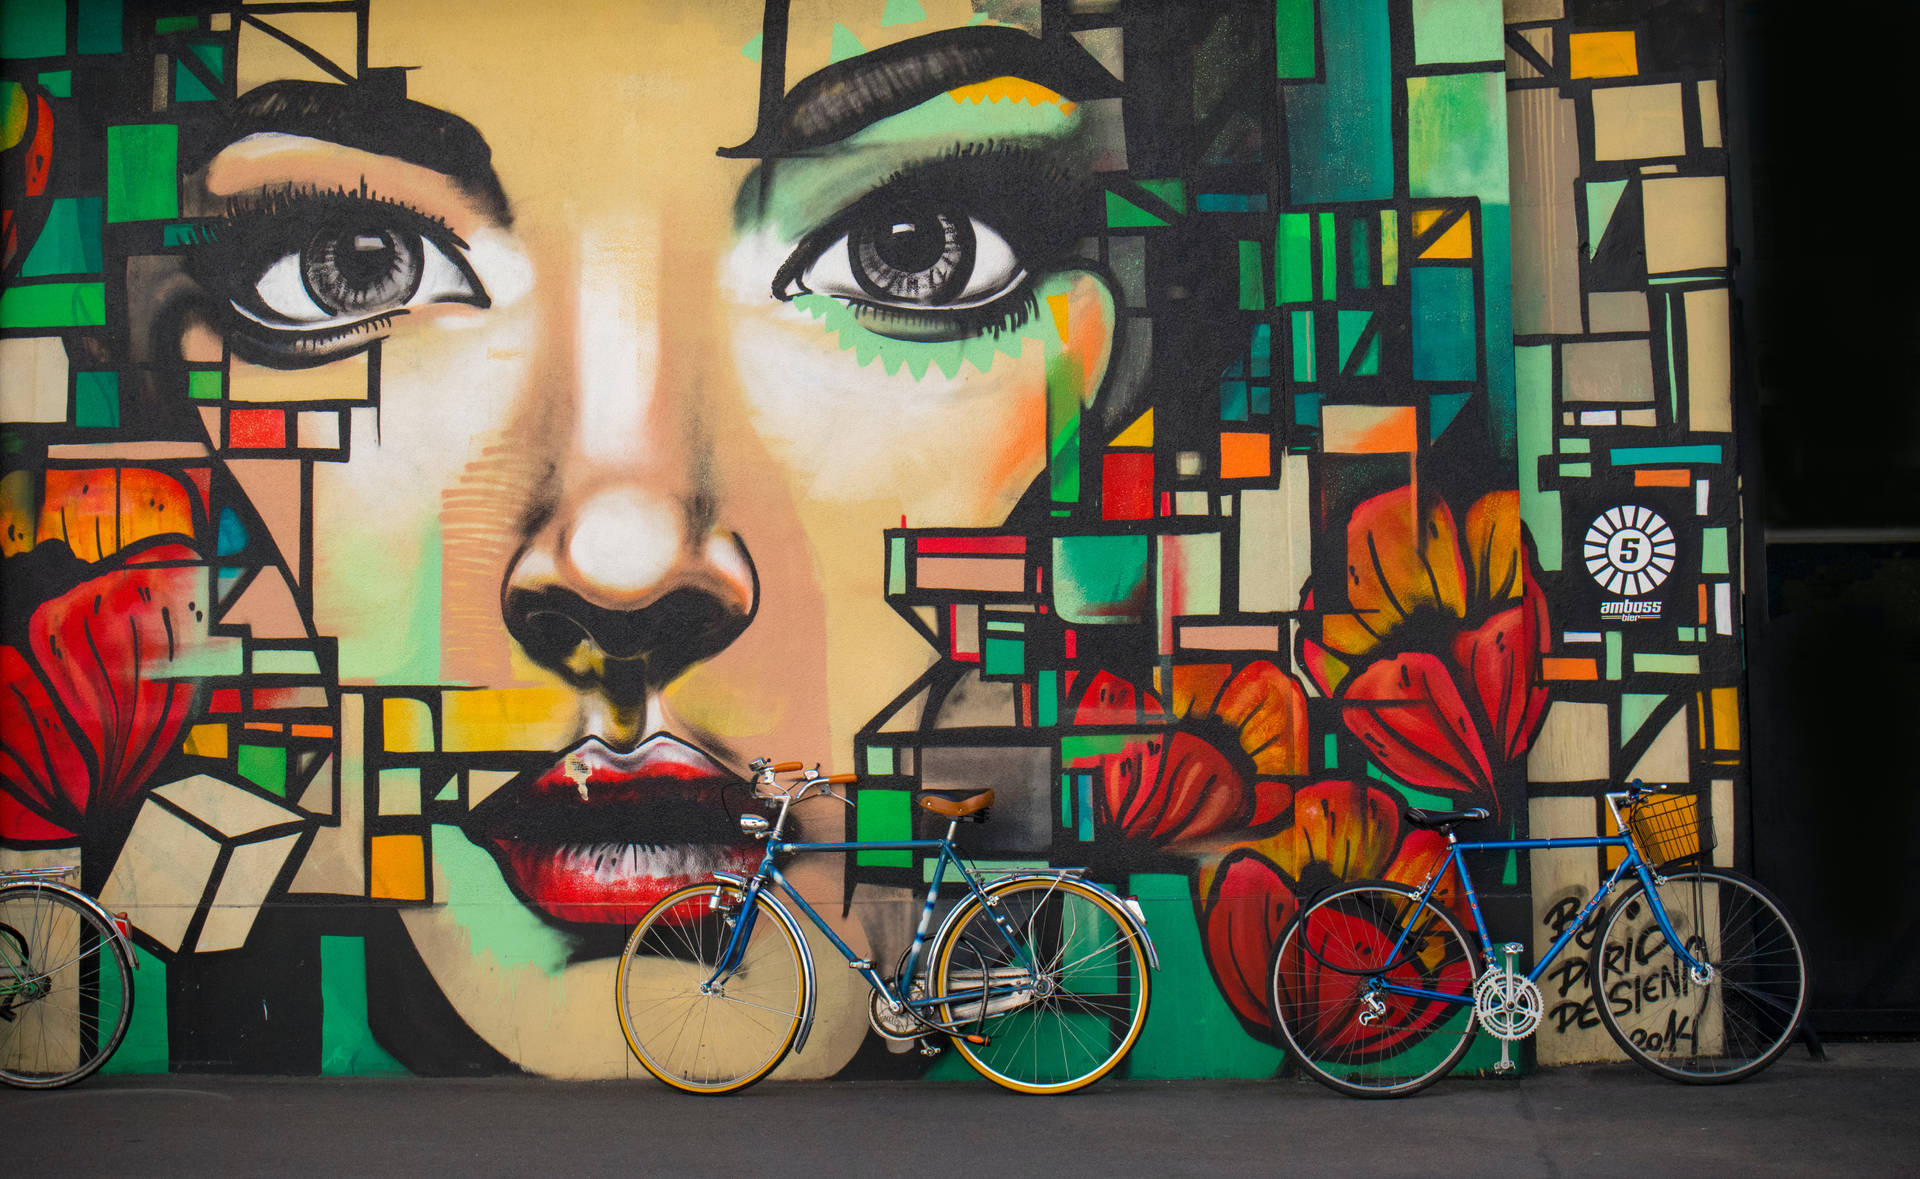 Hd Art Wall With A Parked Bicycle Background